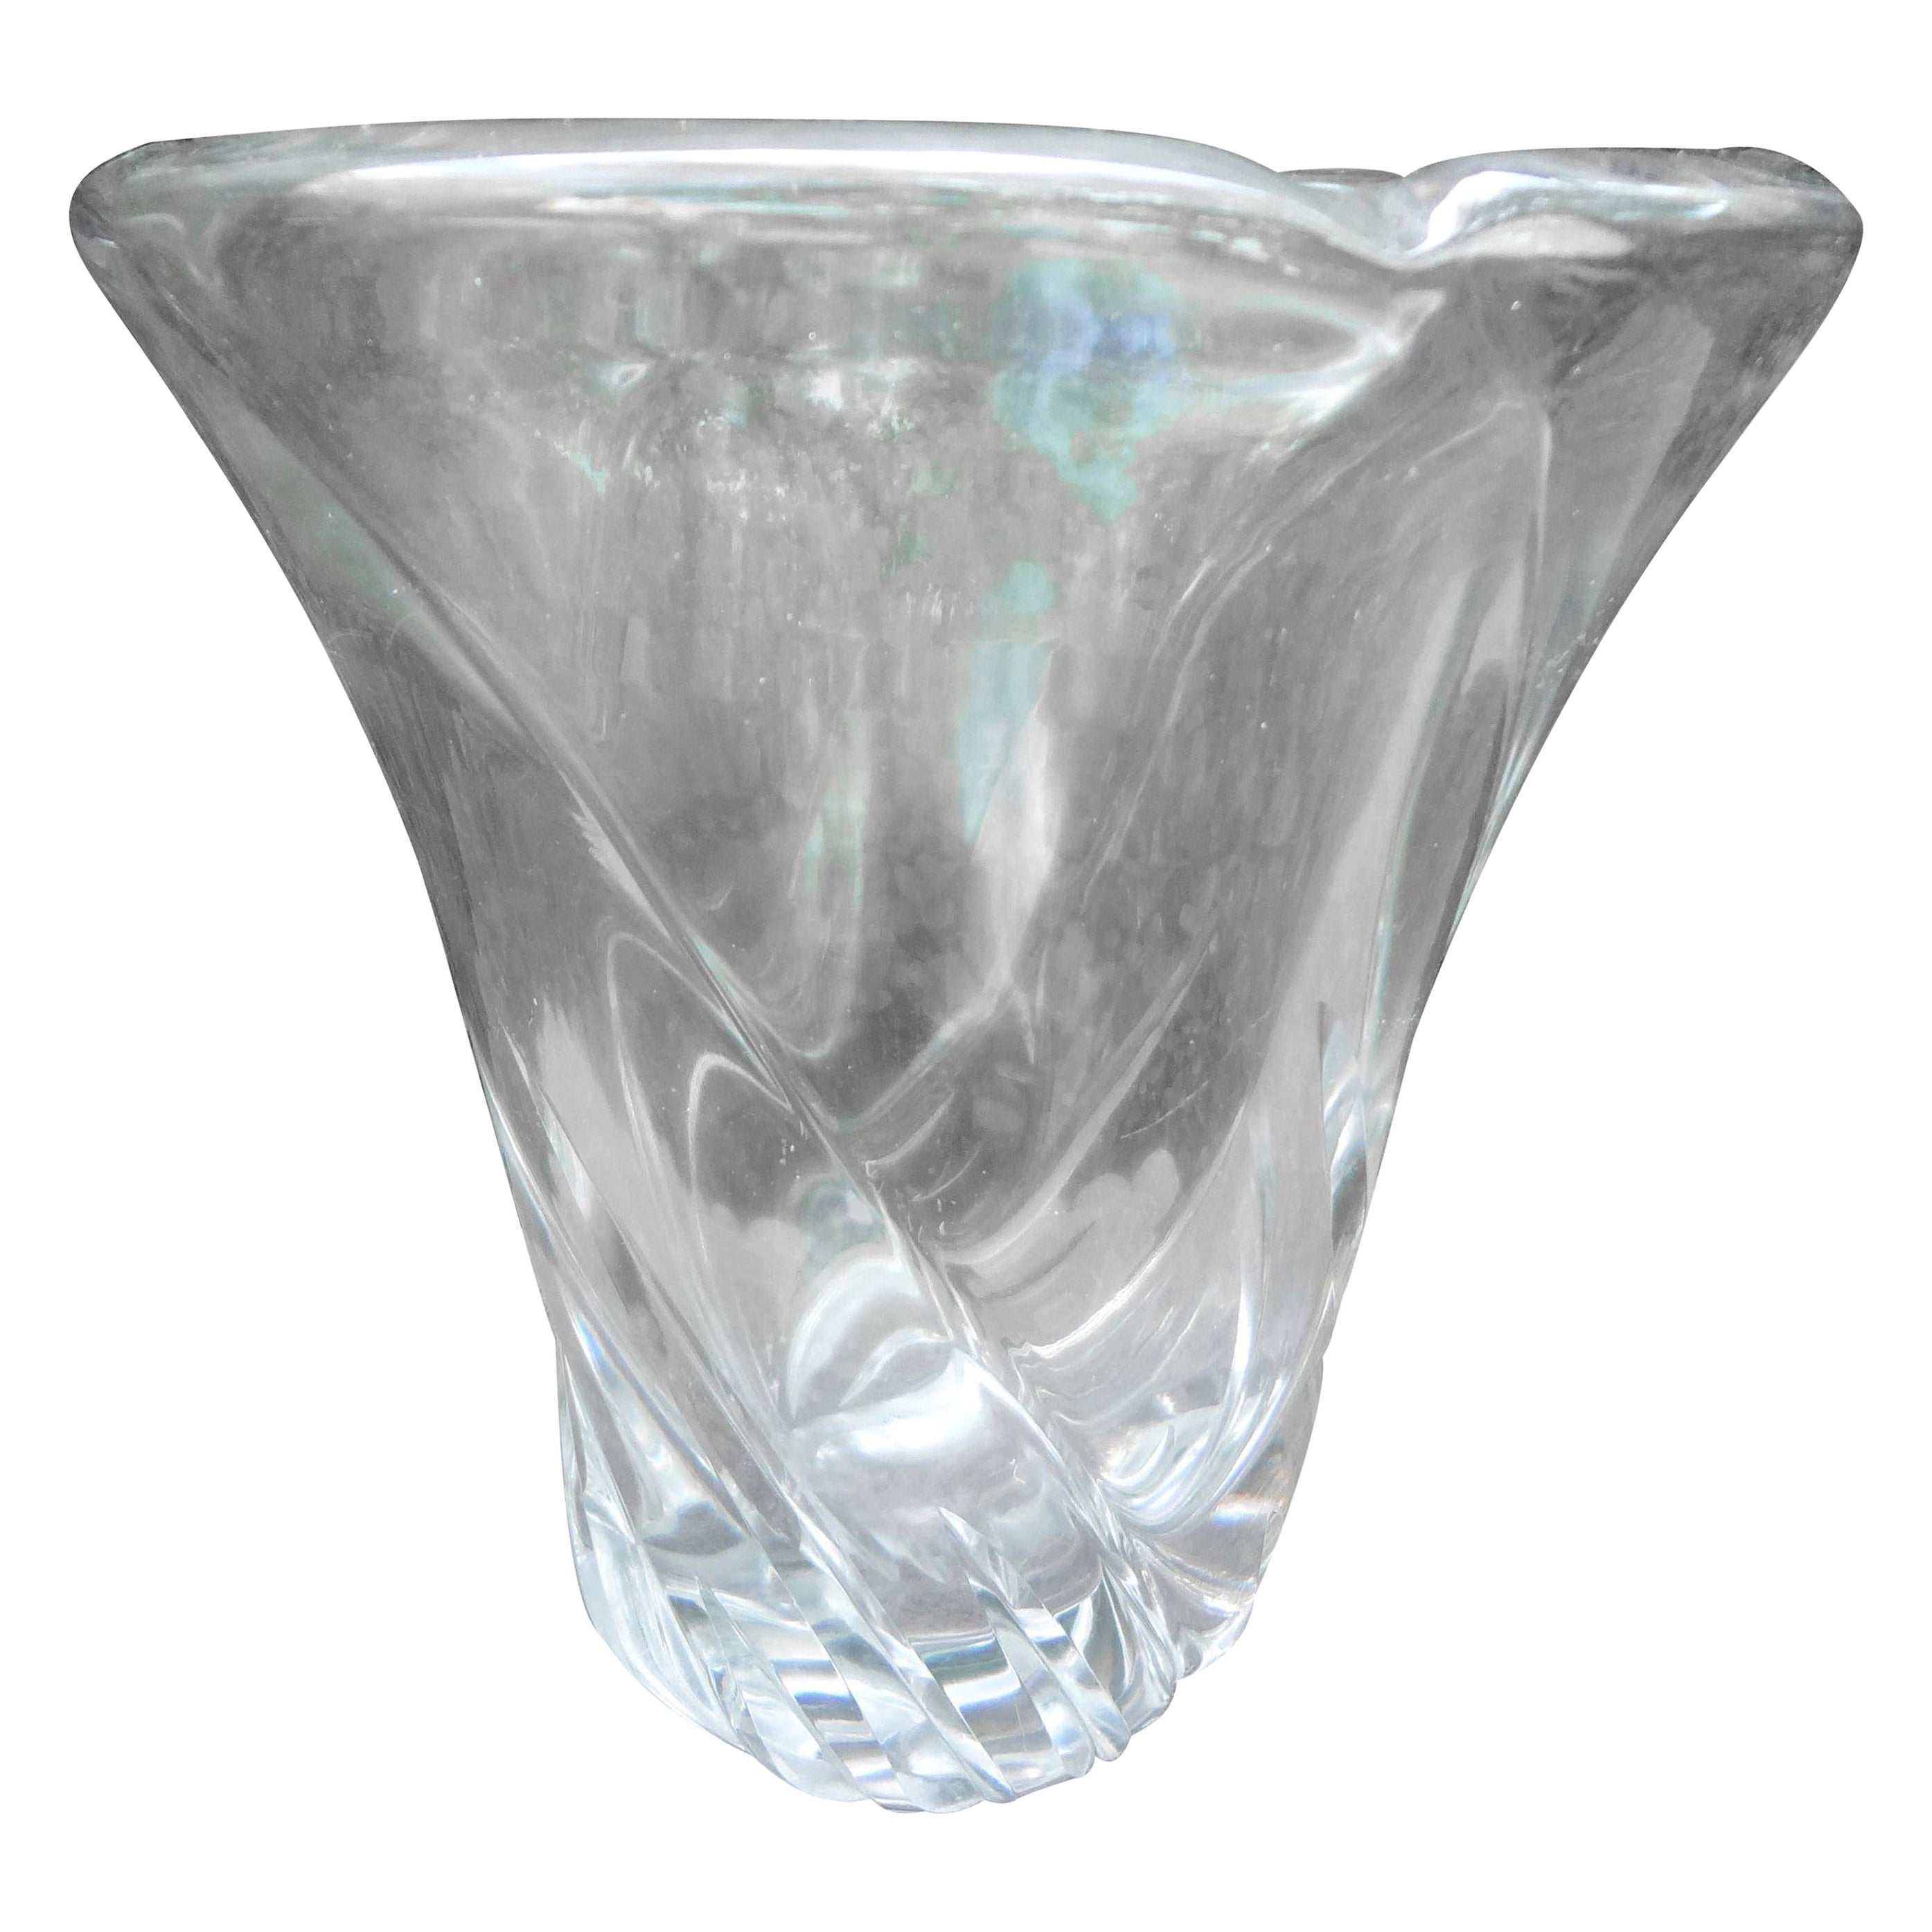 Large French Clear Crystal Vase by Daum